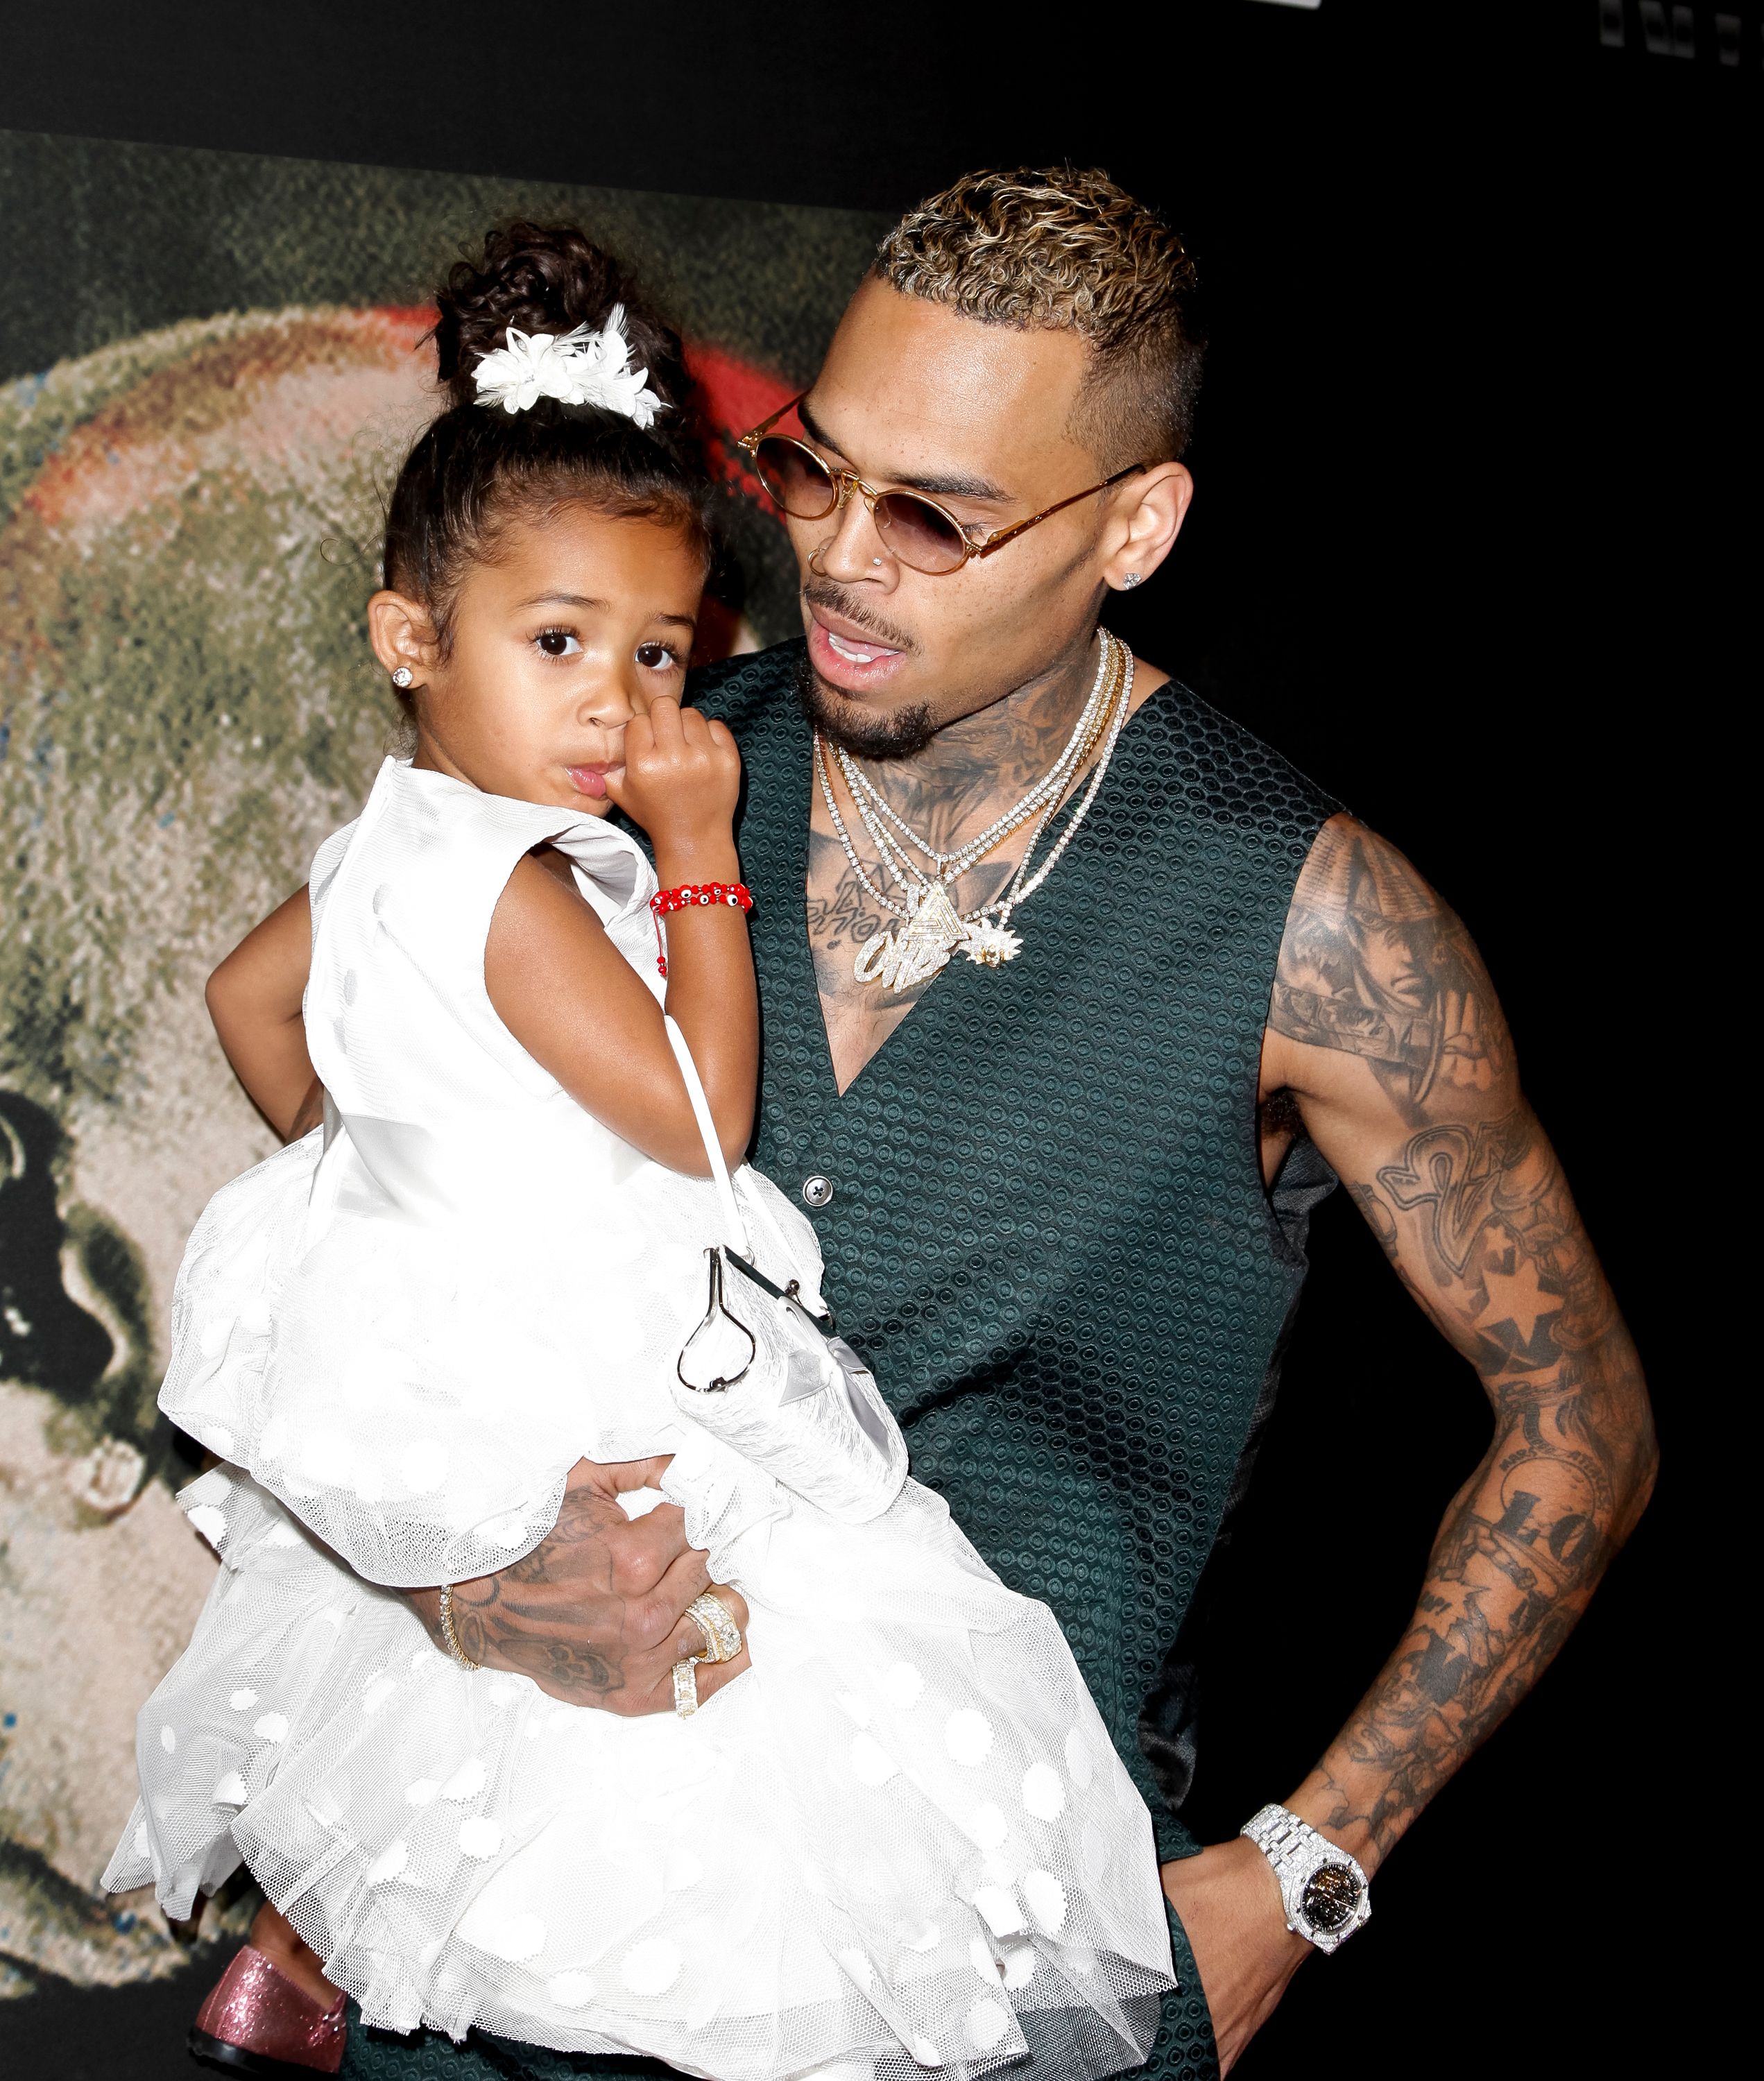 Royalty Brown and Chris Brown during the premiere of Fathom Events 'Chris Brown: Welcome To My Life' at Regal LA Live Stadium 14 on June 6, 2017 in Los Angeles, California. | Source: Getty Images